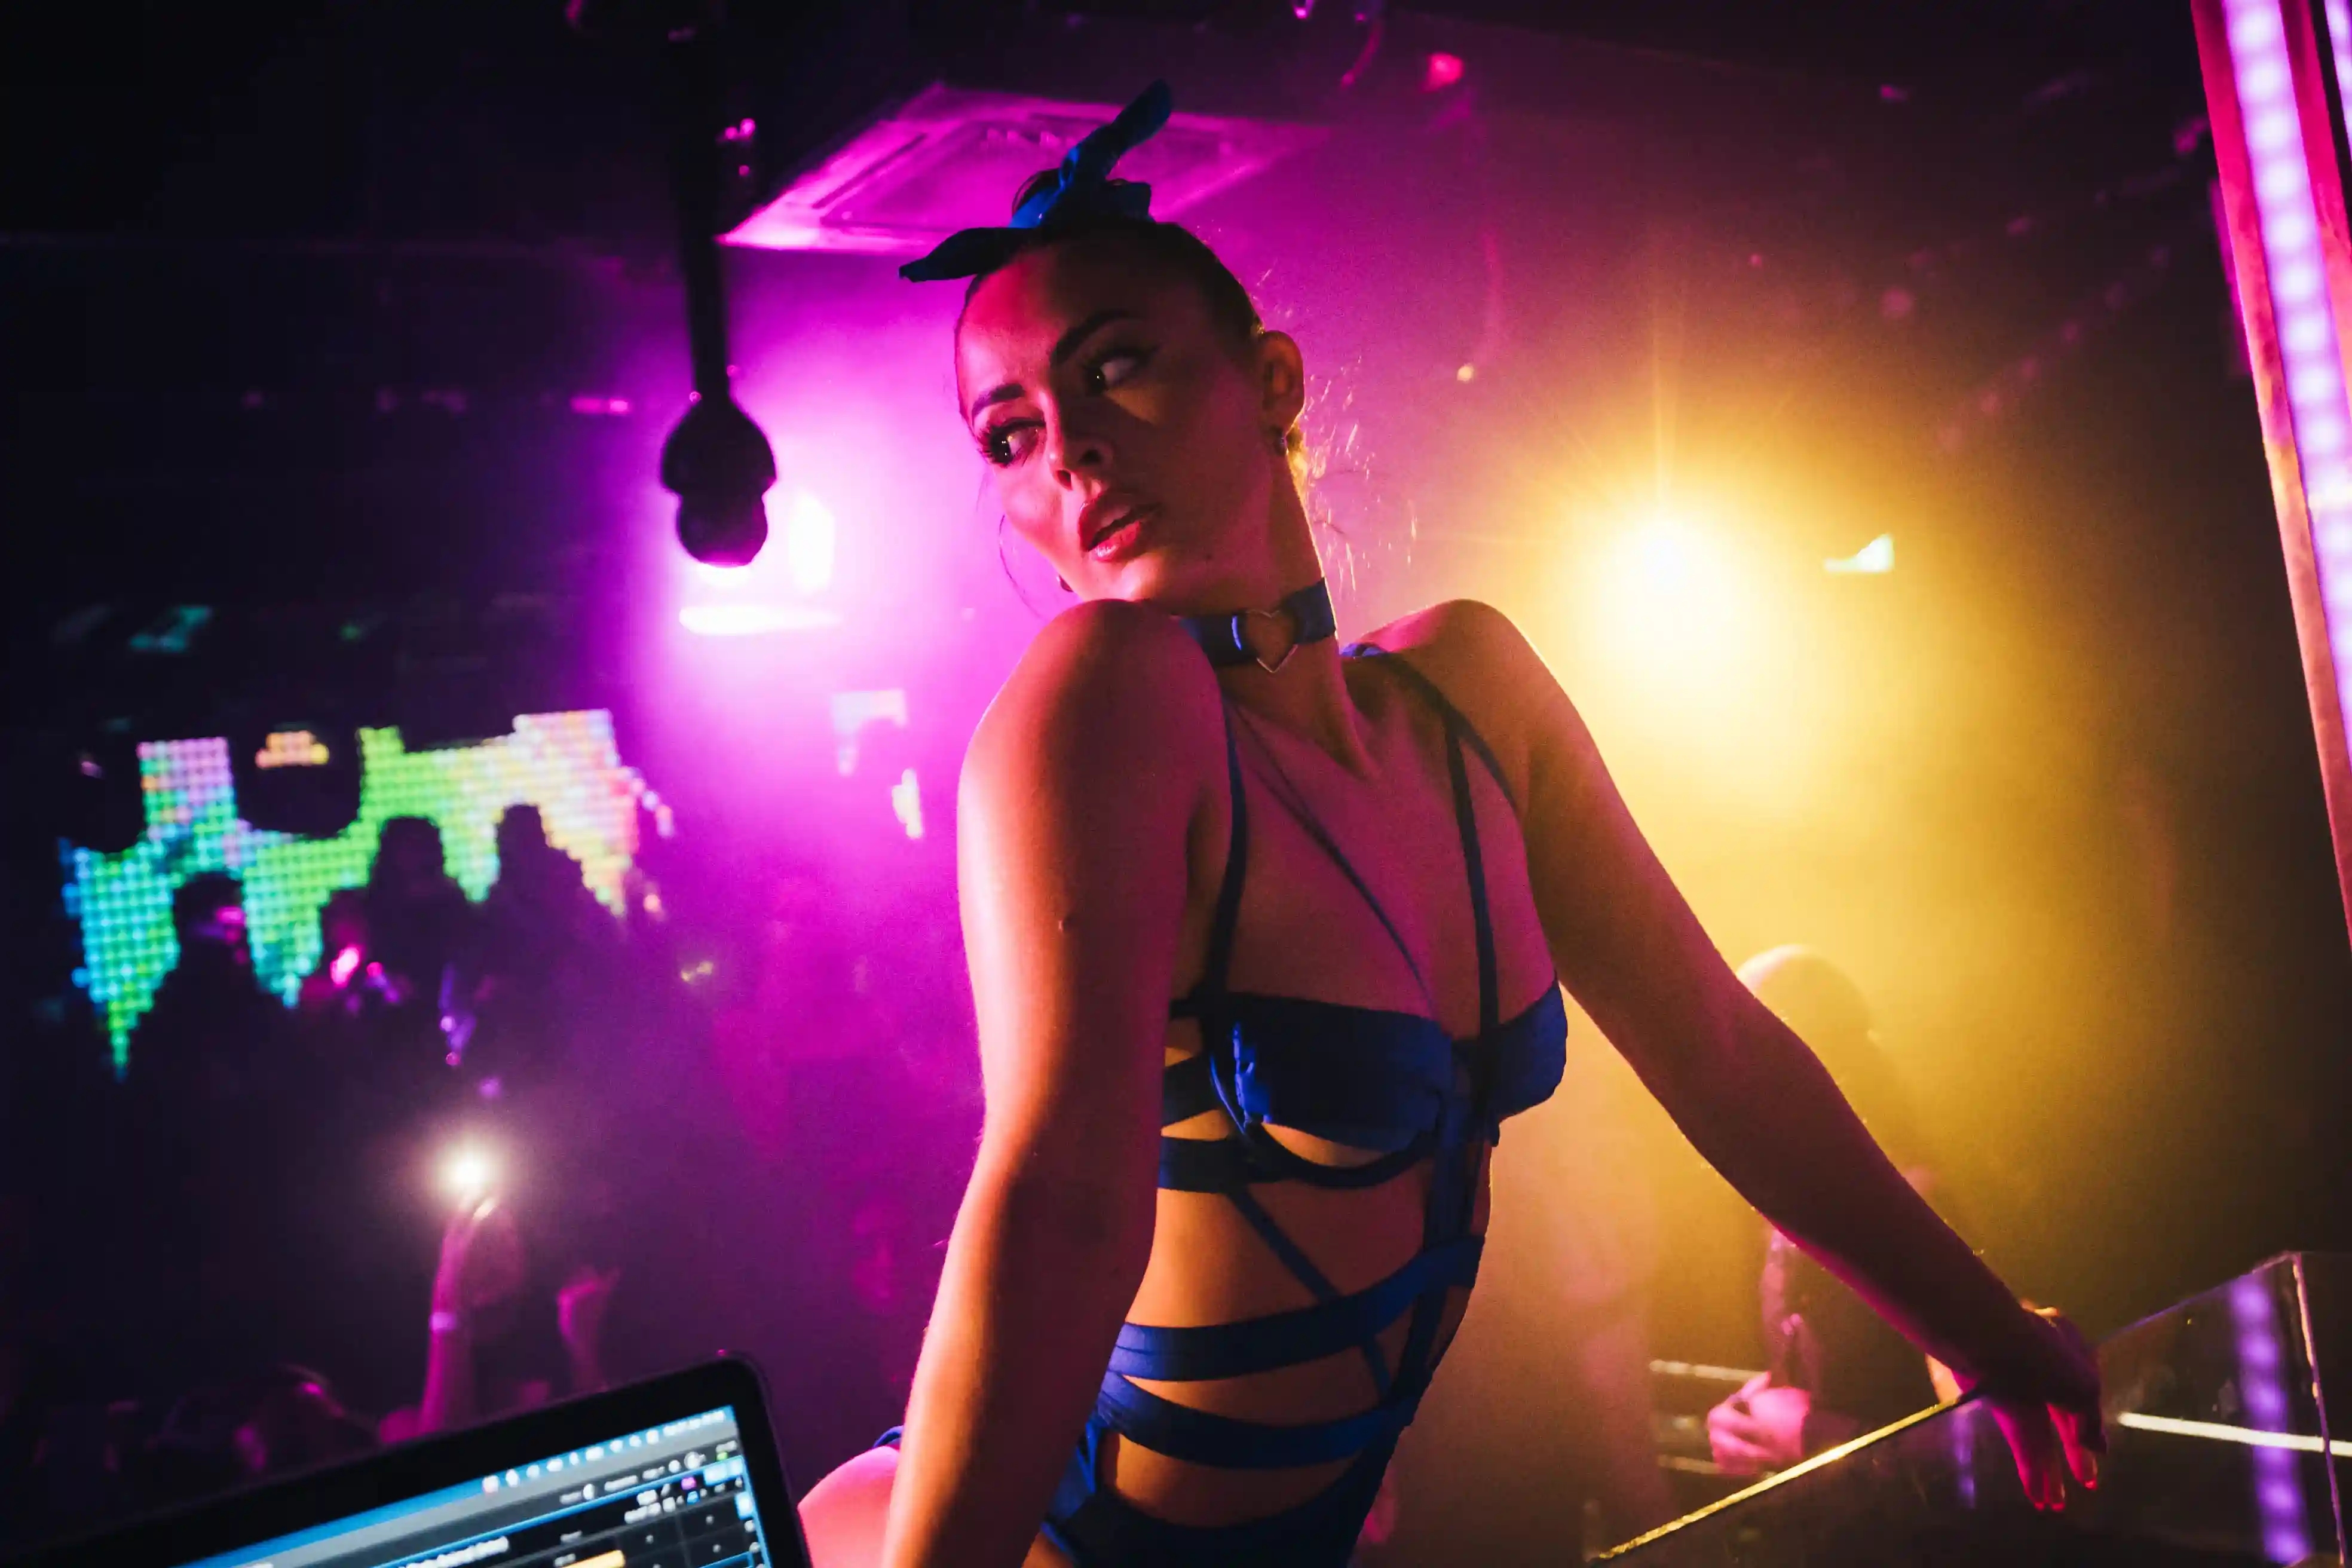 A dancer at Tape London, one of the best clubs in London.